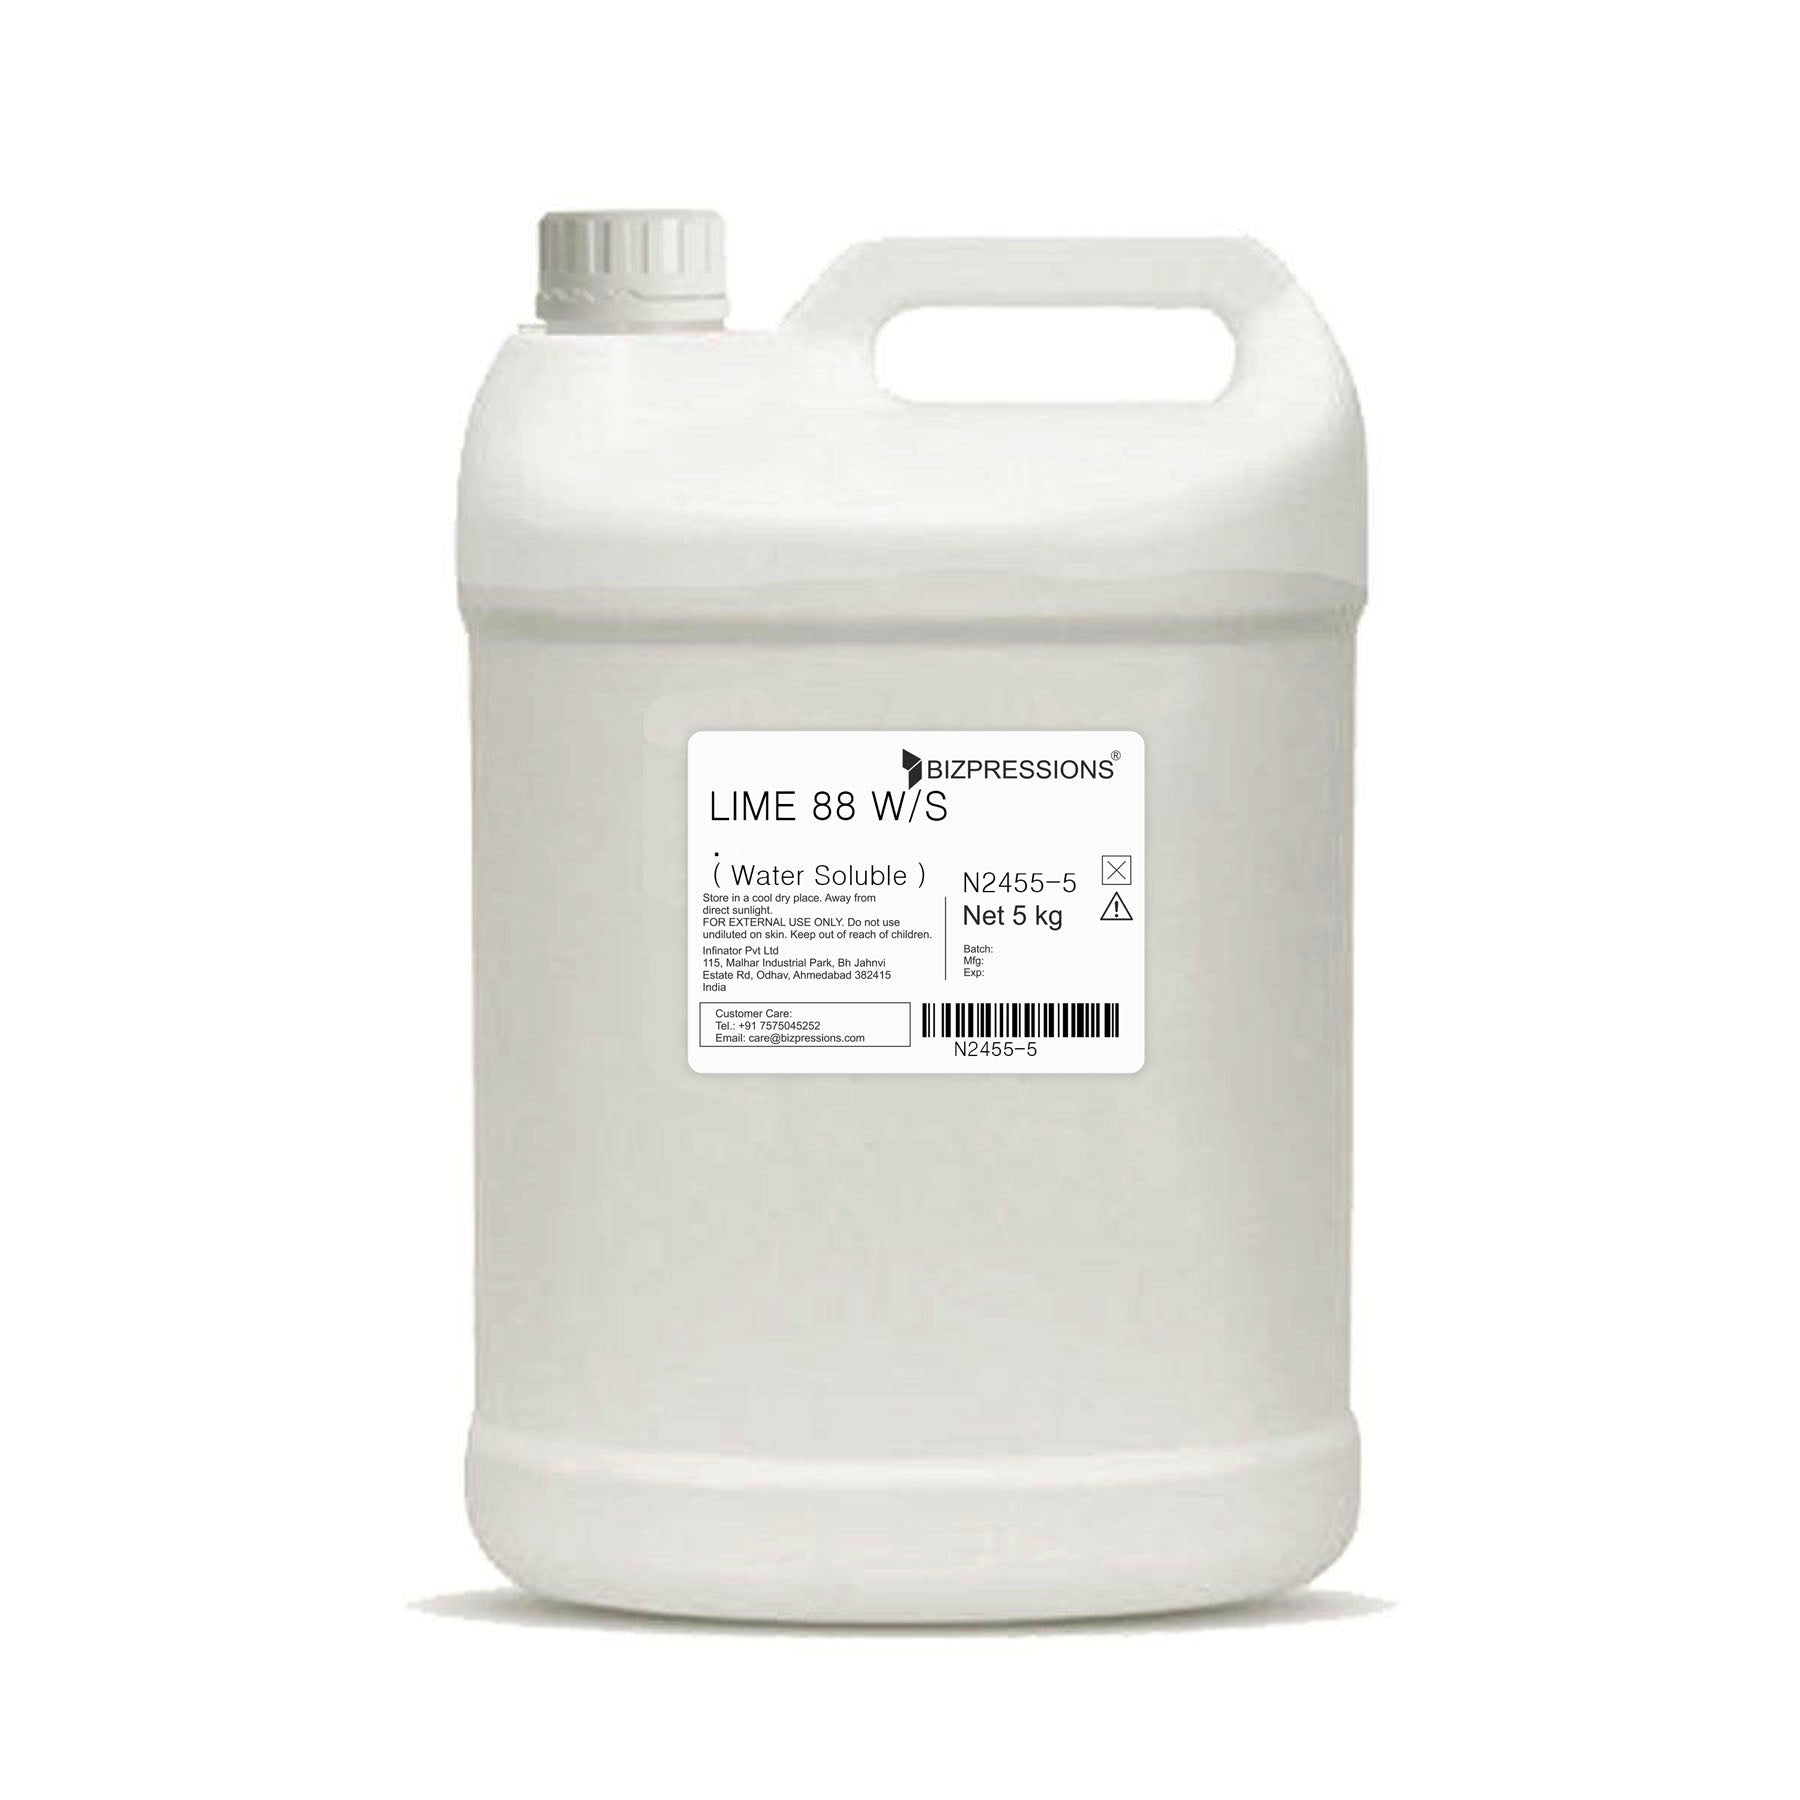 LIME 88 W/S - Fragrance ( Water Soluble ) - 5 kg